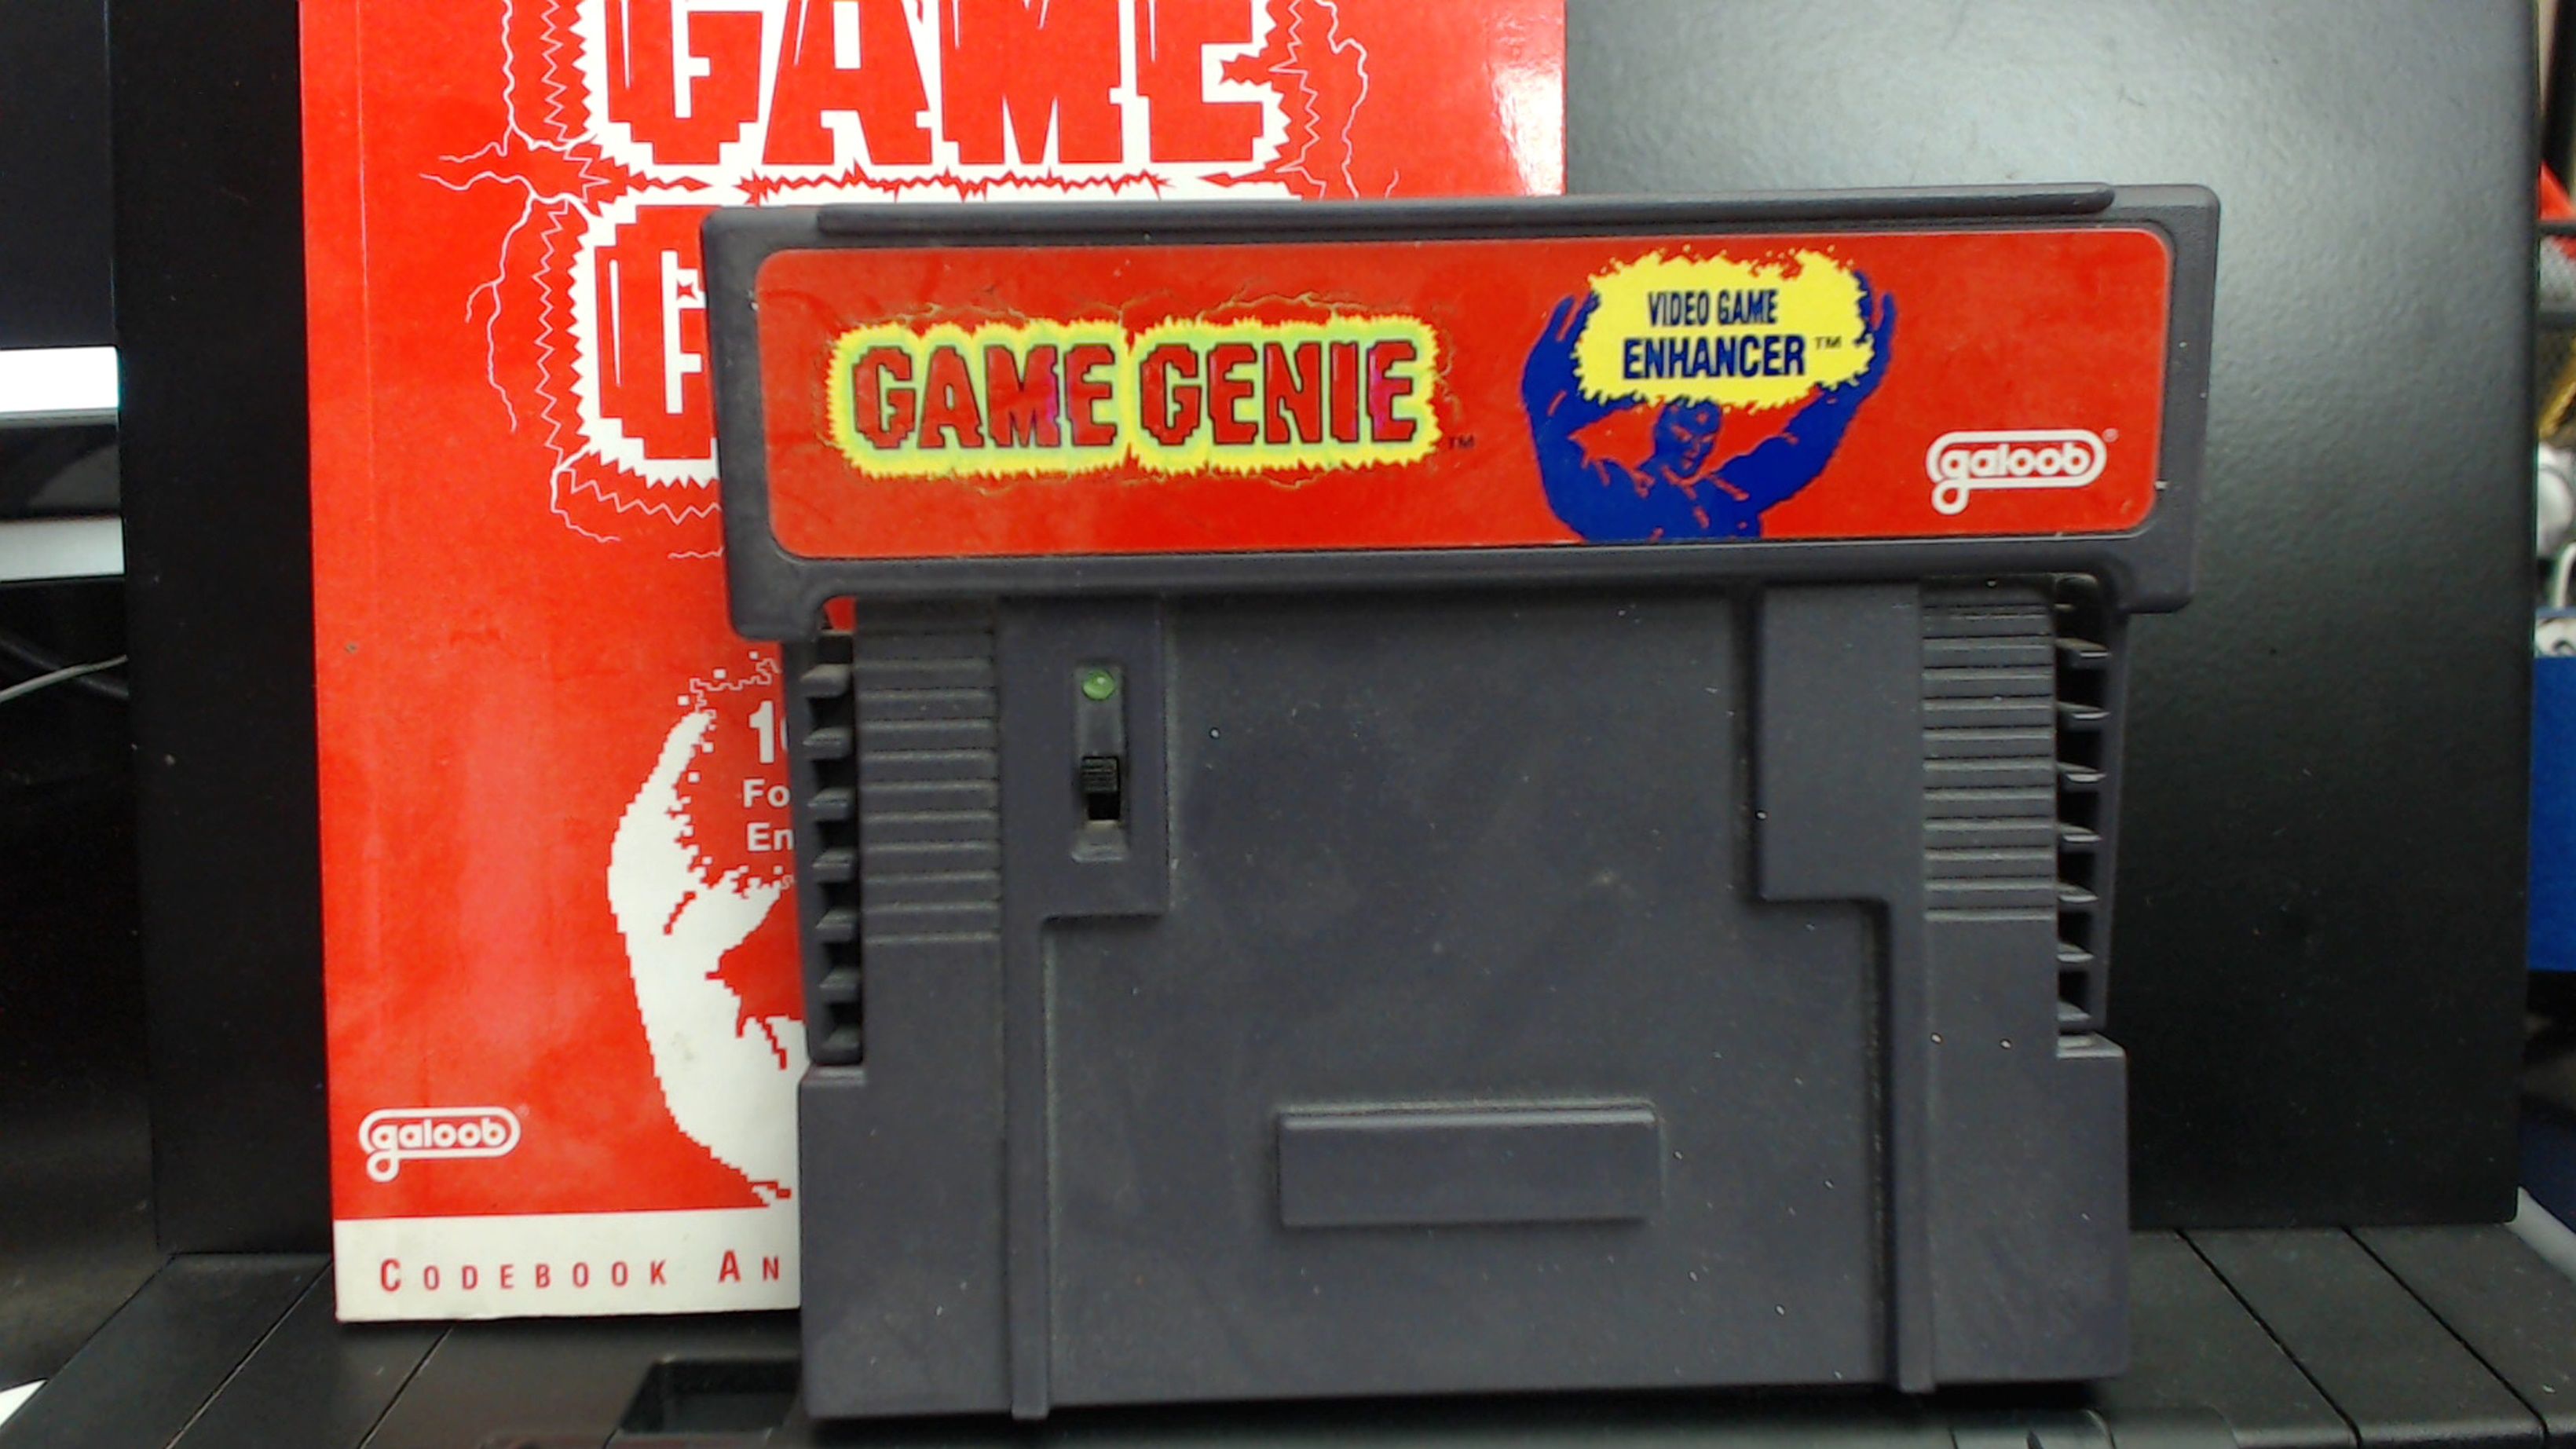 GAME GENIE - (Super Nintendo, SNES) - Cartridge and Manual. CHEAT CODES - UNLOCK EVERYTHING - GAMESHARK - ACTION REPLAY